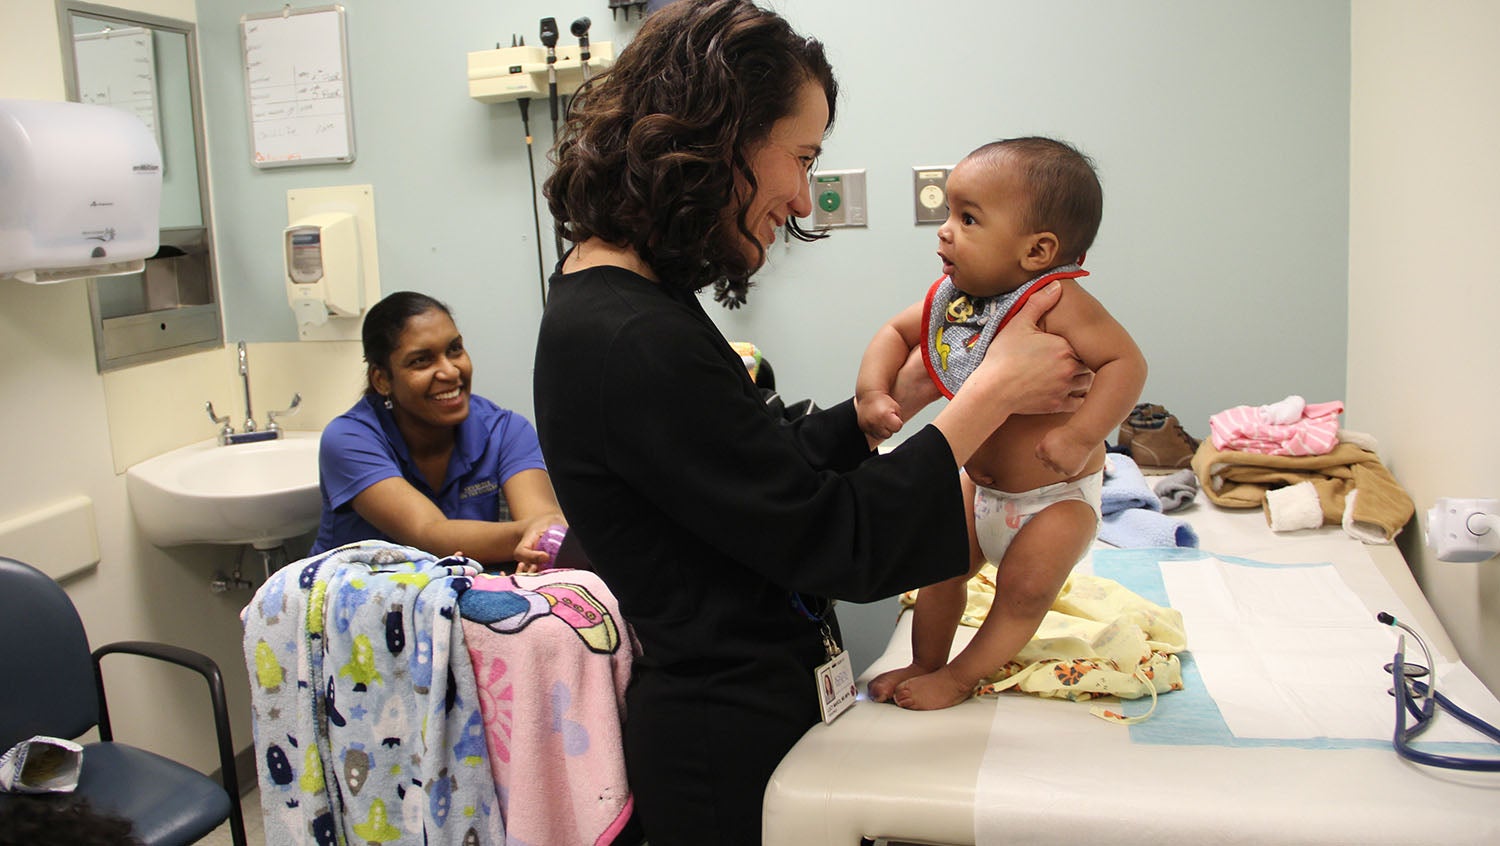 Lucy Marcil, MD holds a baby in a pediatric well visit